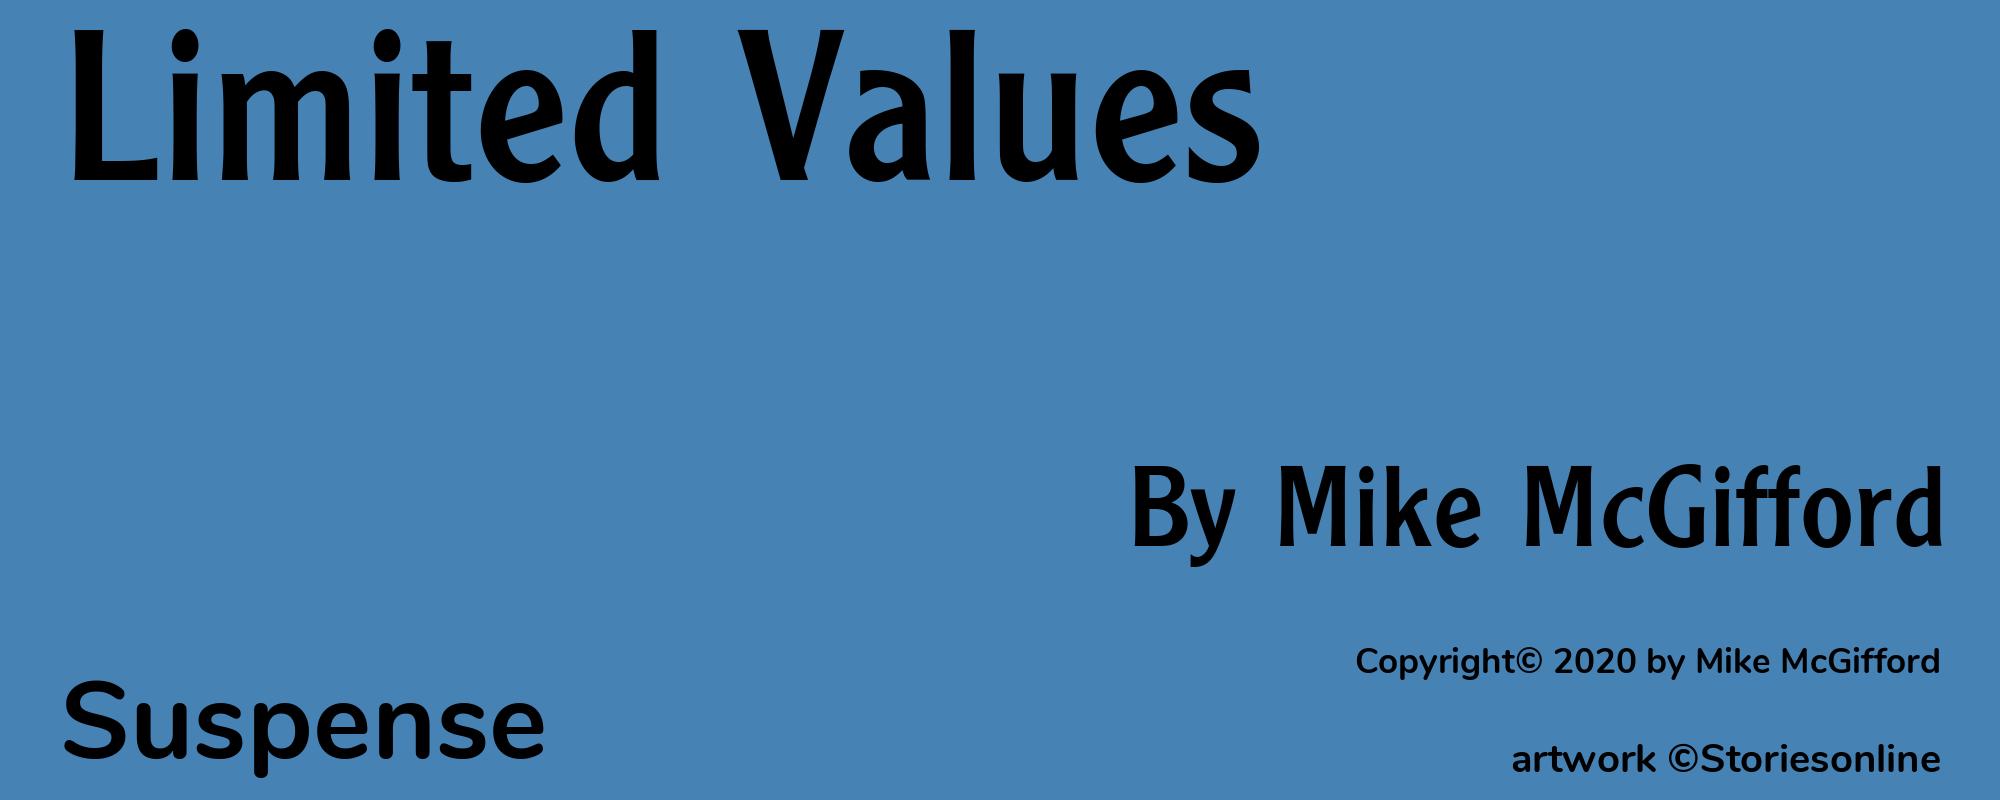 Limited Values - Cover